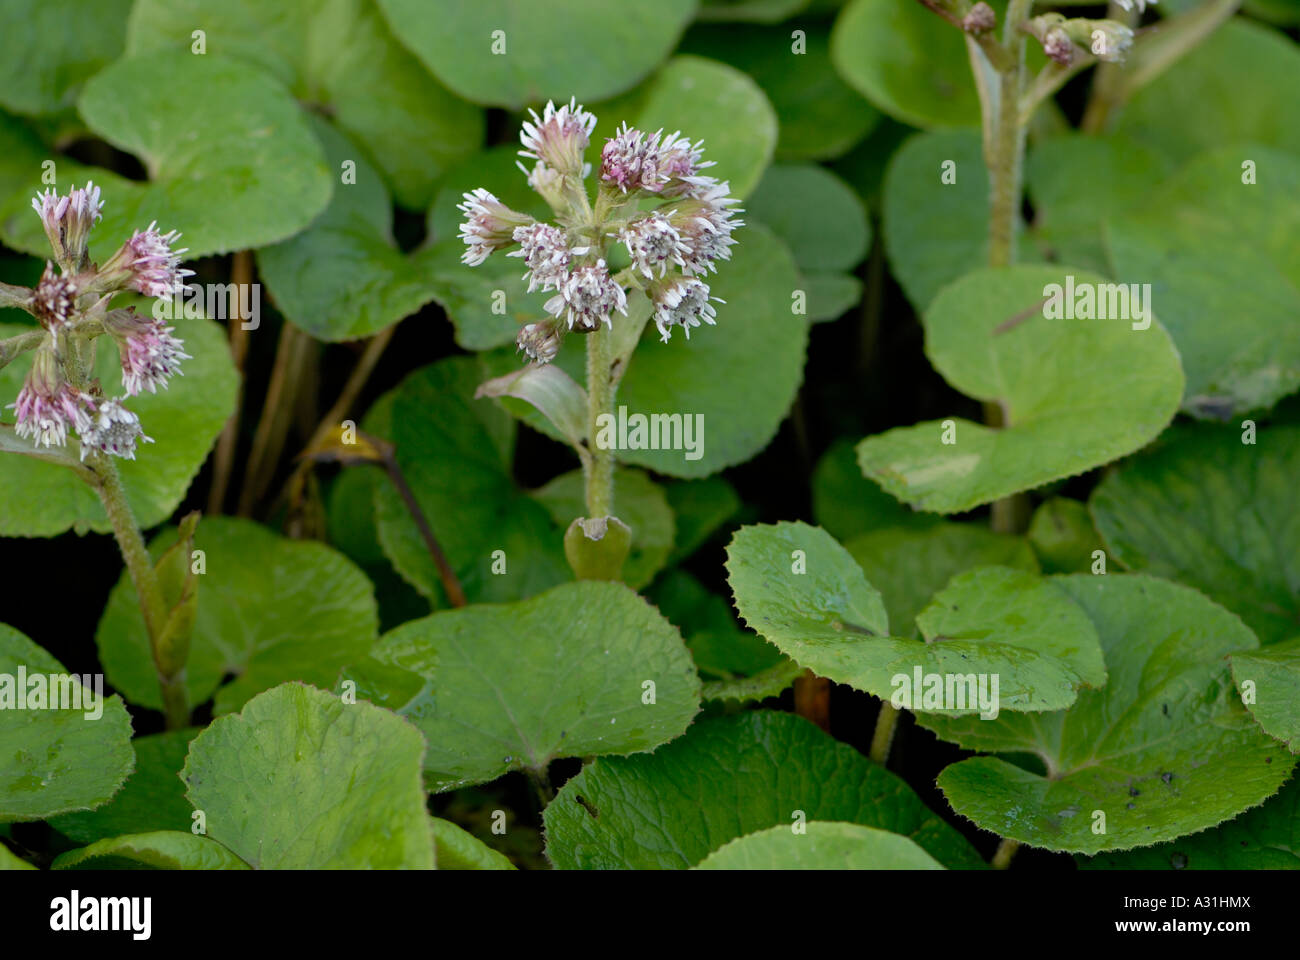 Lilac vanilla scented flowers of the winter flowering Winter Heliotrope Petasites fragrans Stock Photo